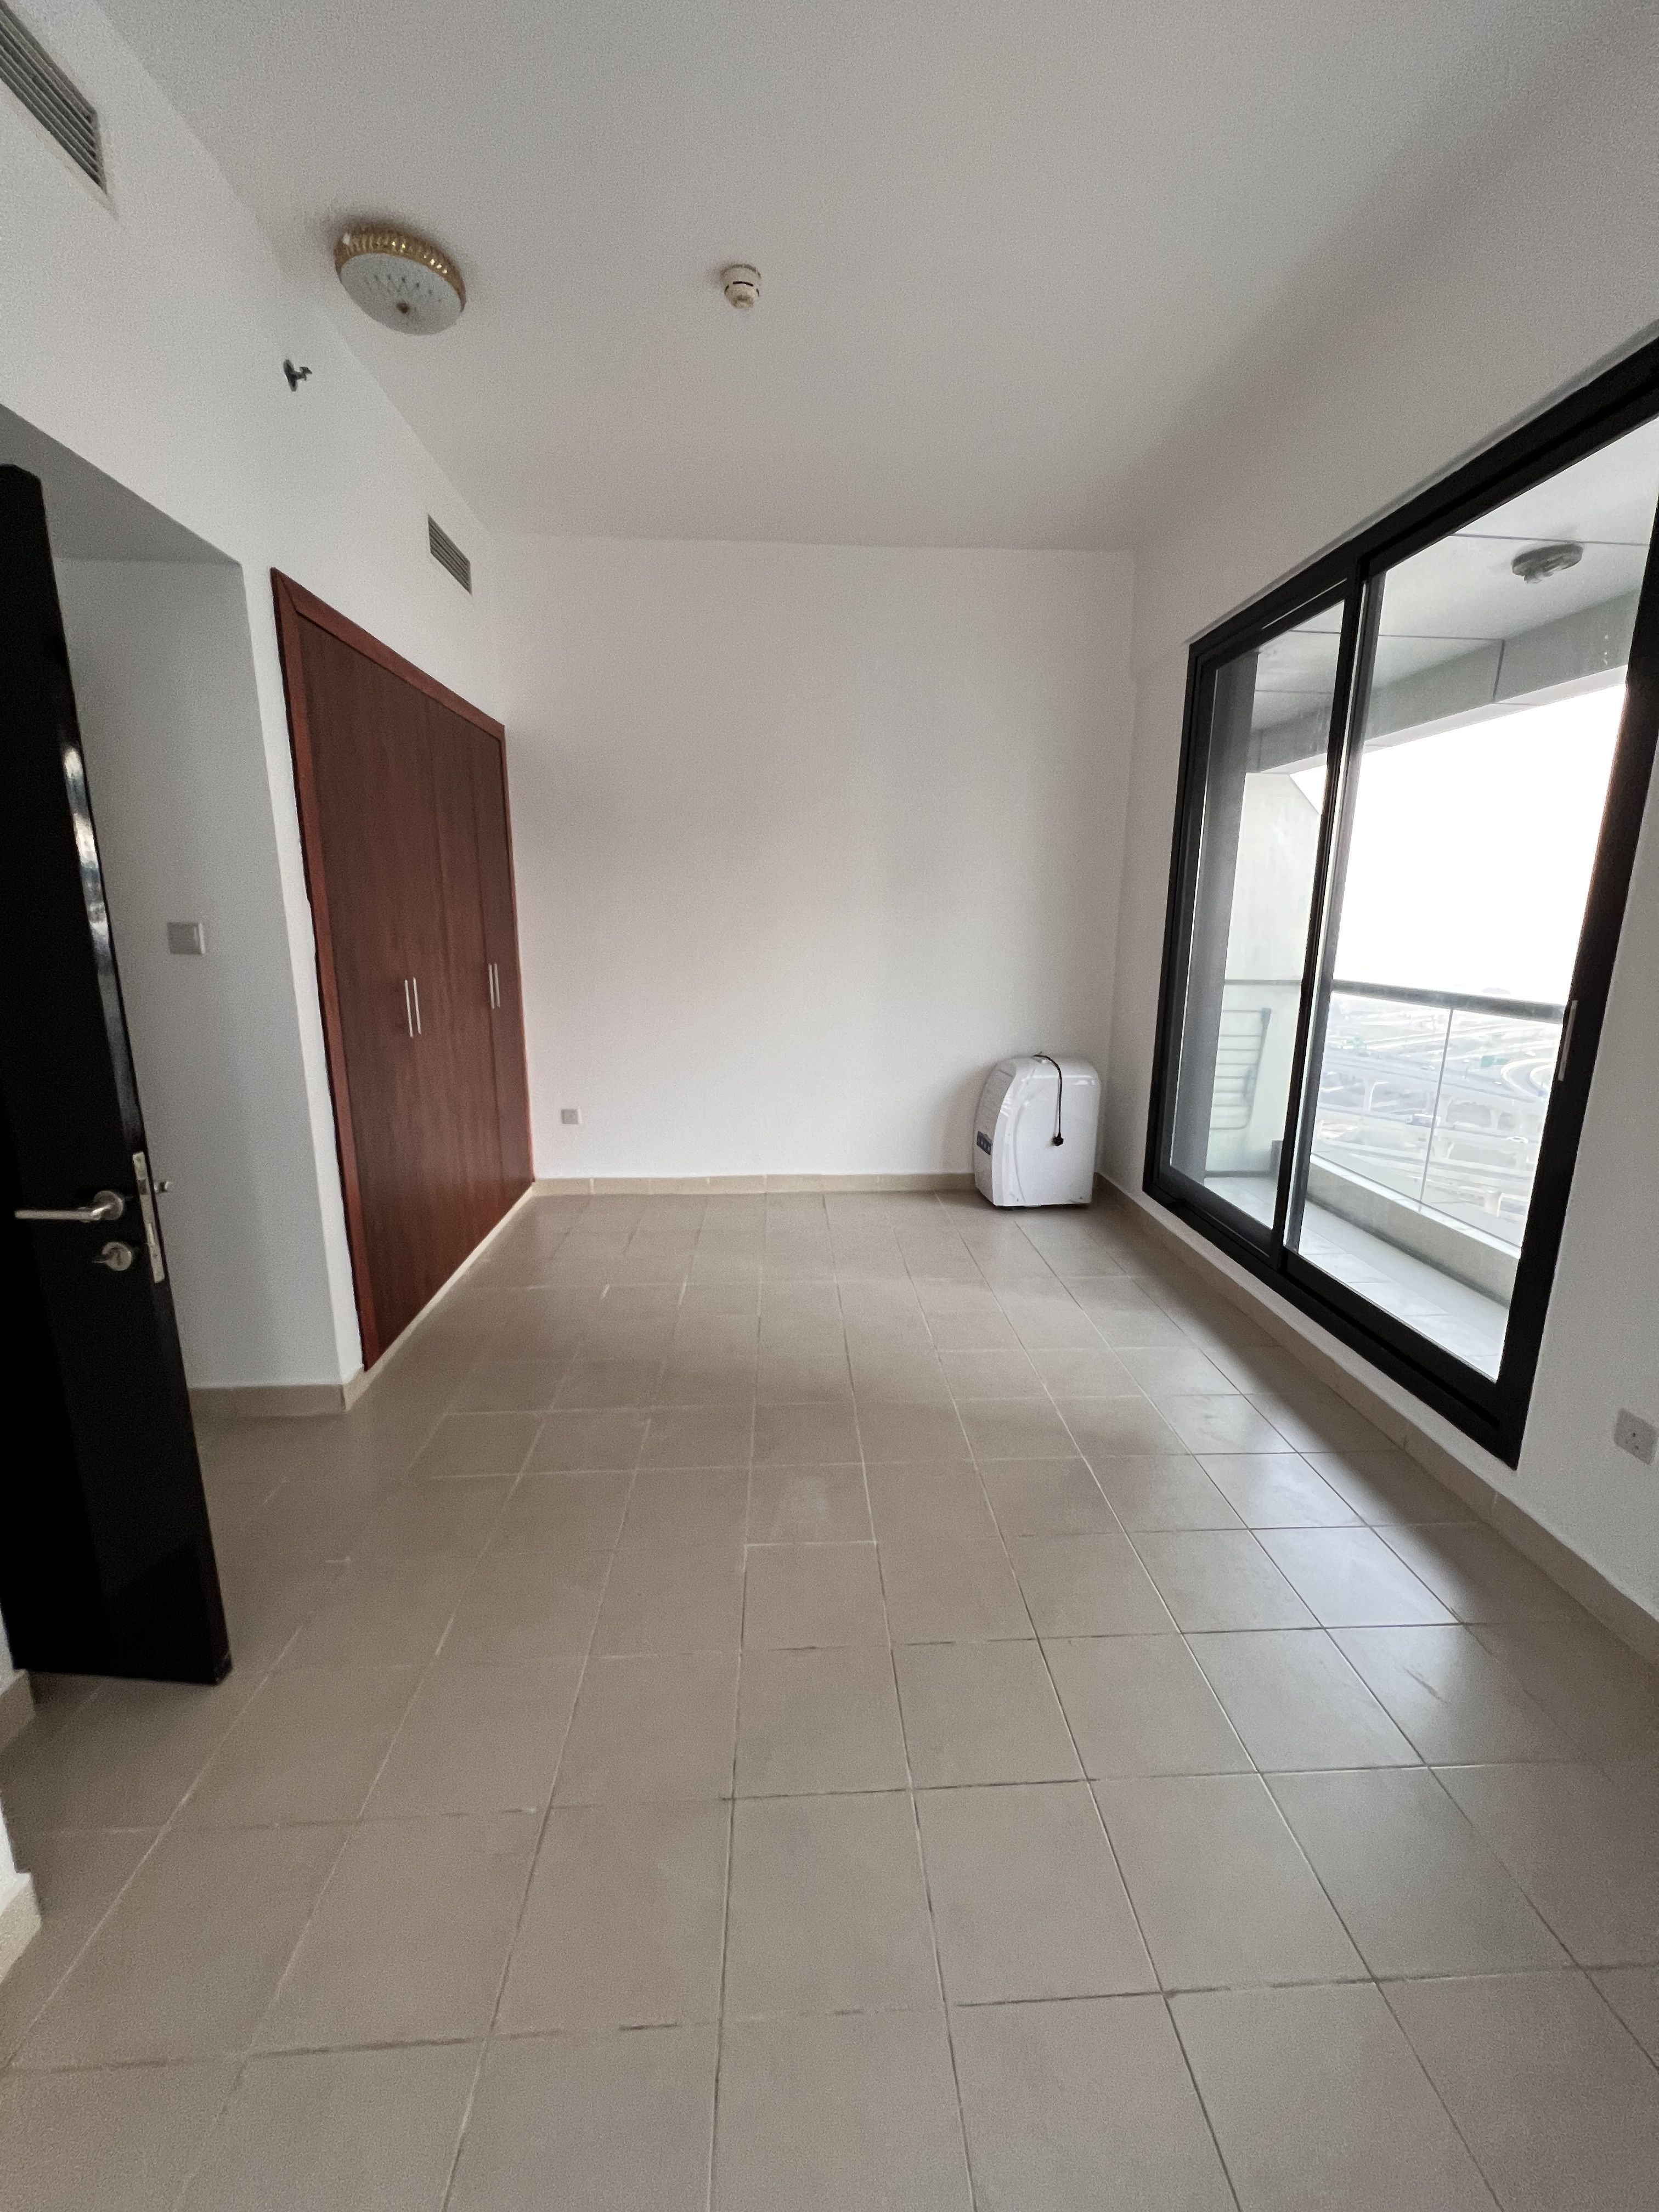 ONE BED ROOM FOR RENT IN ESCAN MARINA DUBAI MARINA